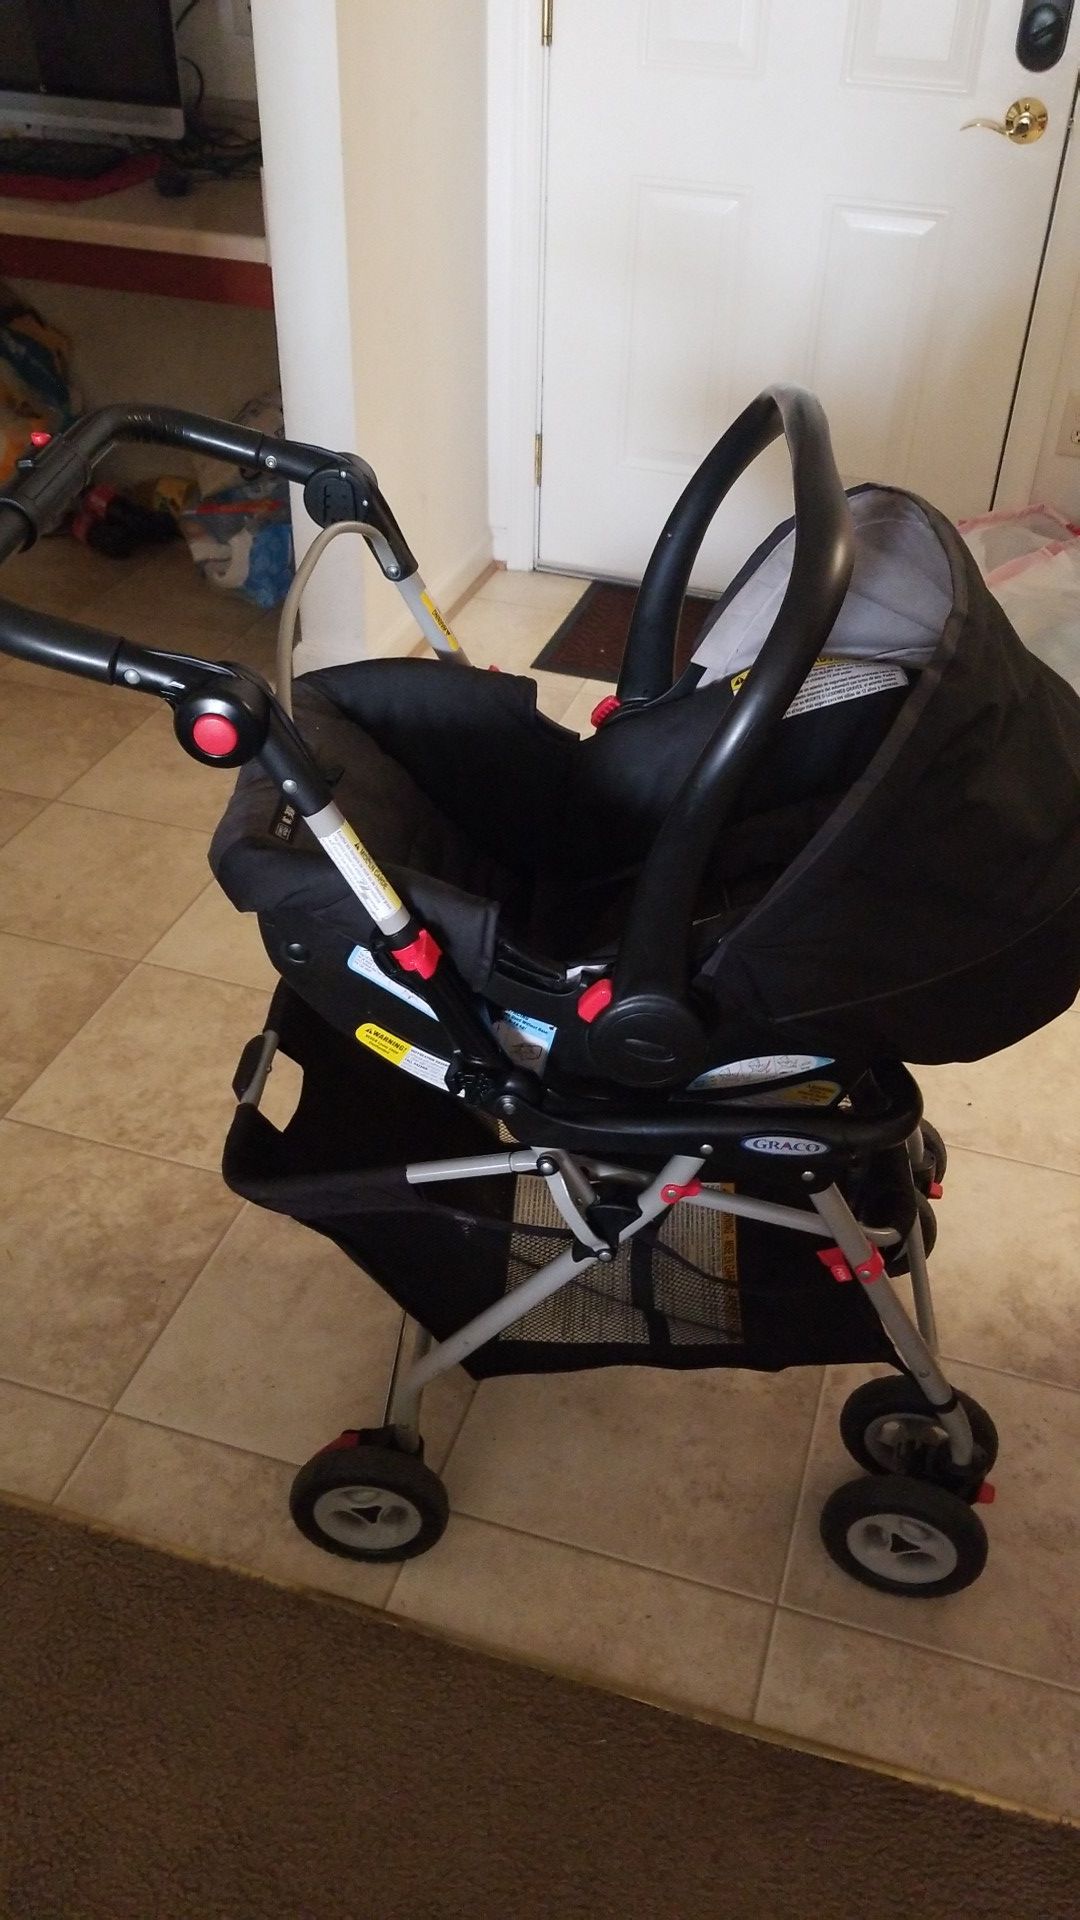 Graco car seat with stroller.